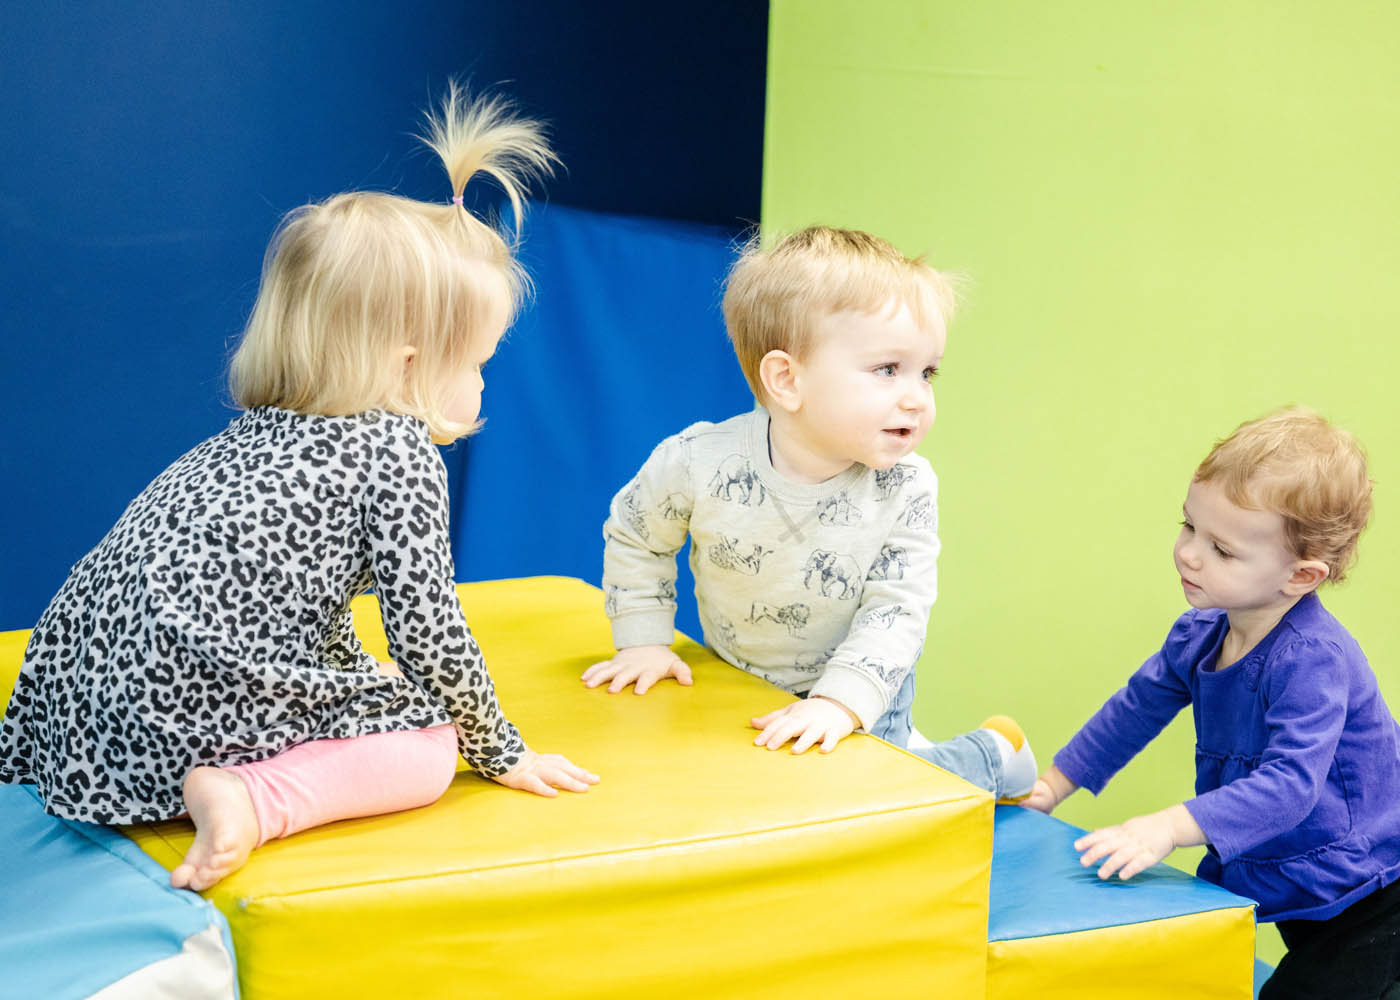 A group of kids playing together experiencing the benefits of socialization classes at Romp n' Roll.